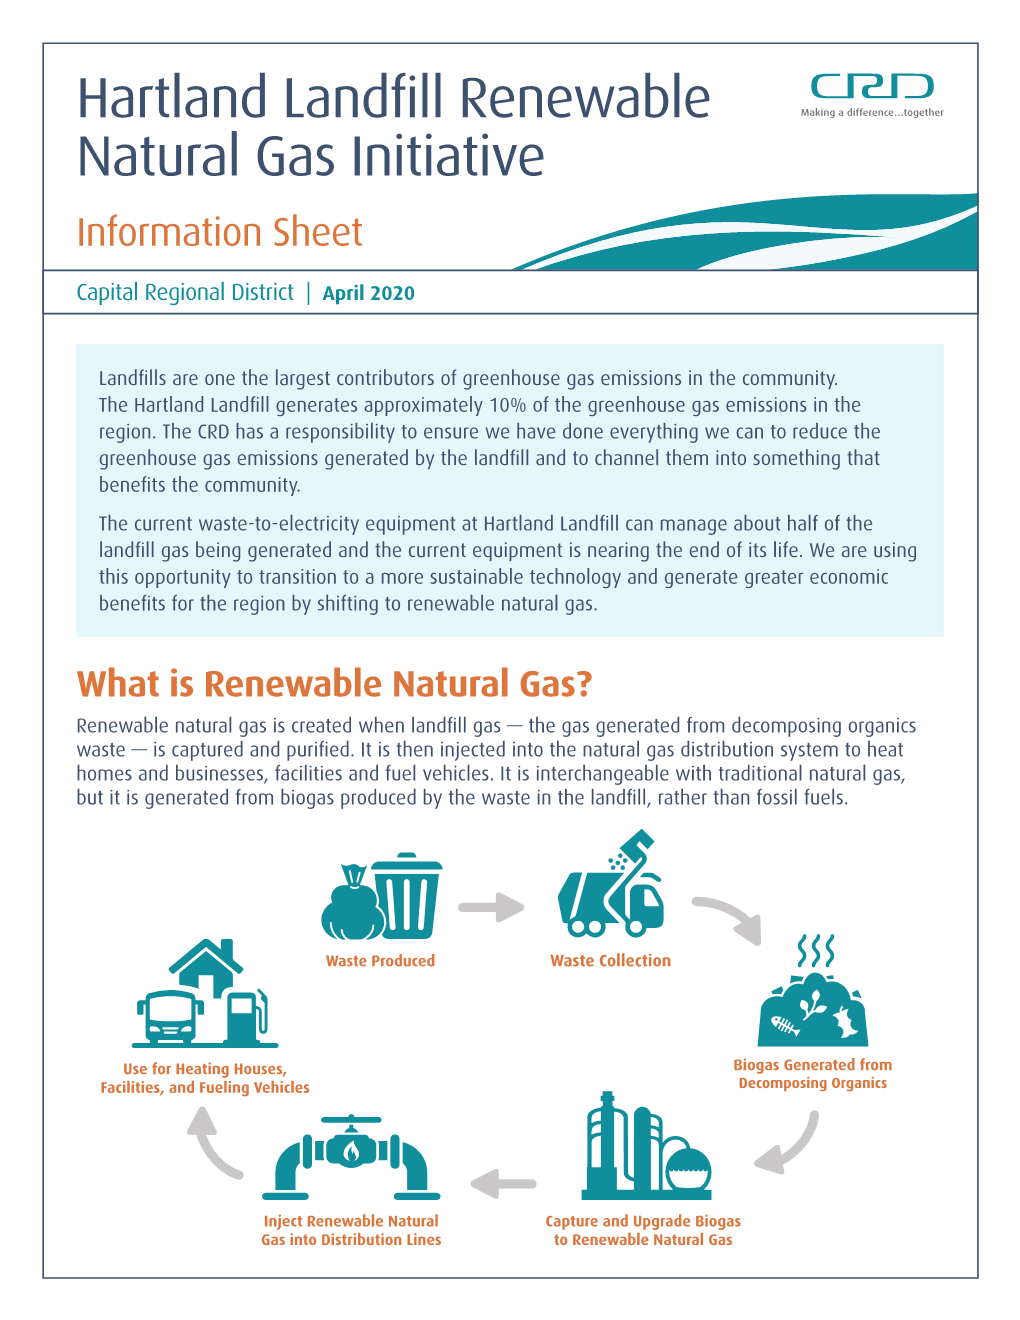 What Is the Hartland Renewable Natural Gas Initiative?